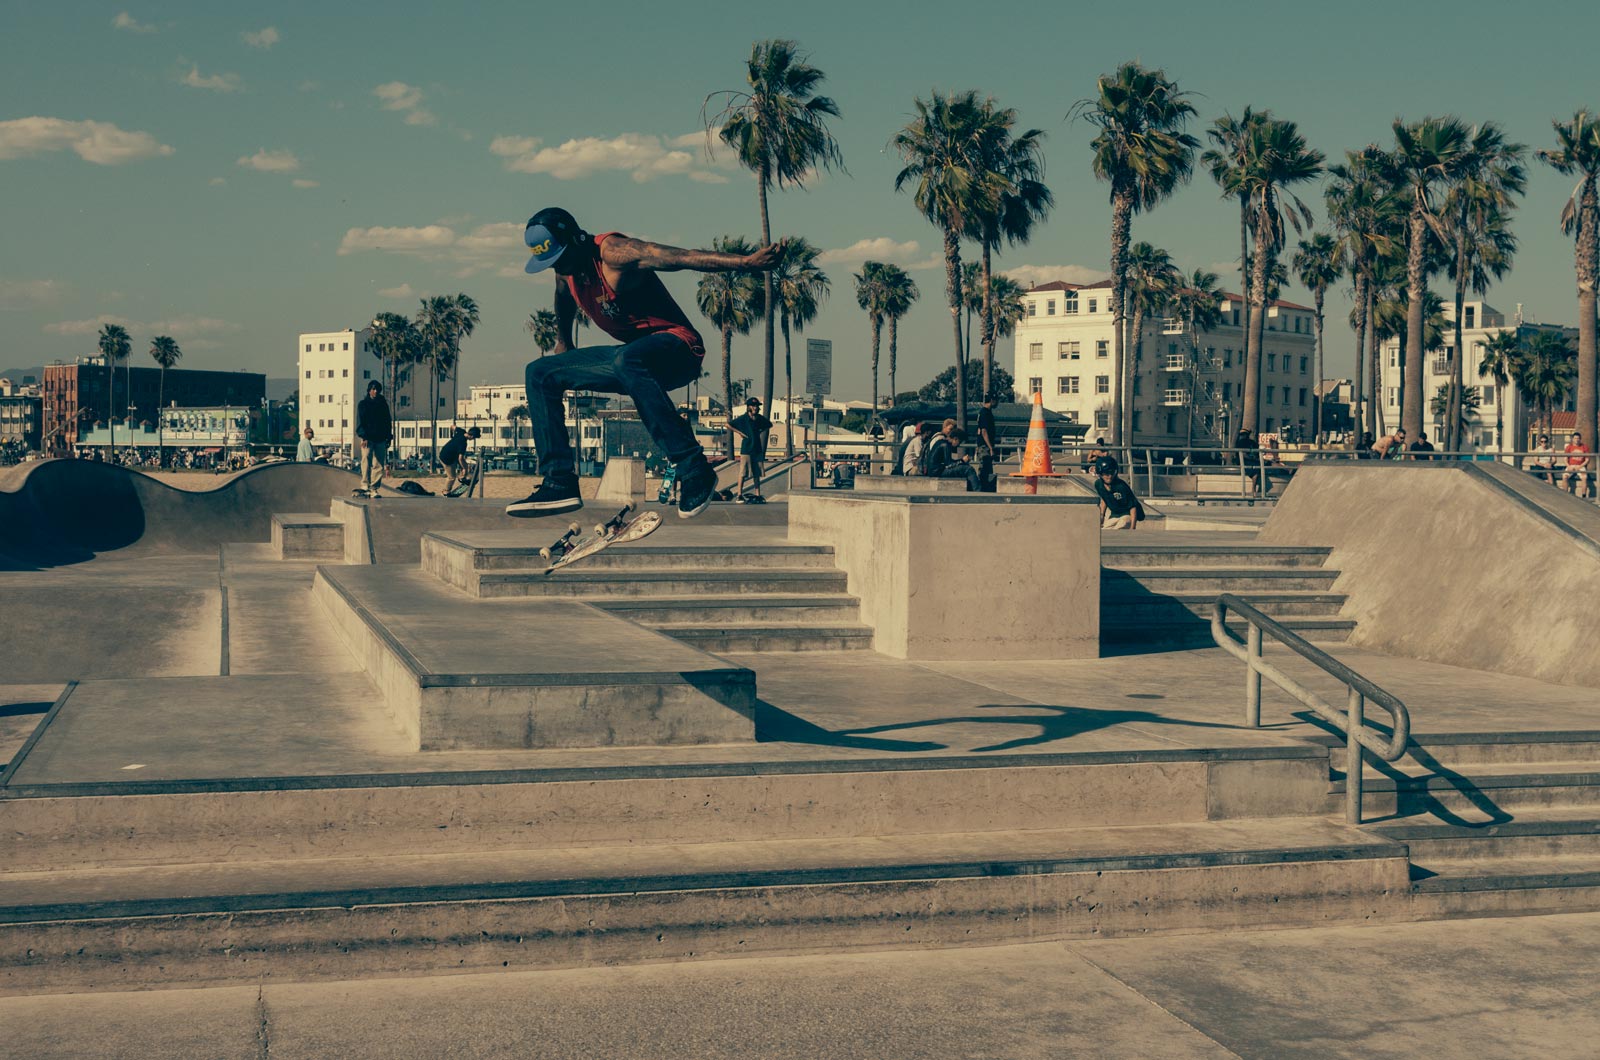  Is Skateboarding a Real Sport or a Crime?